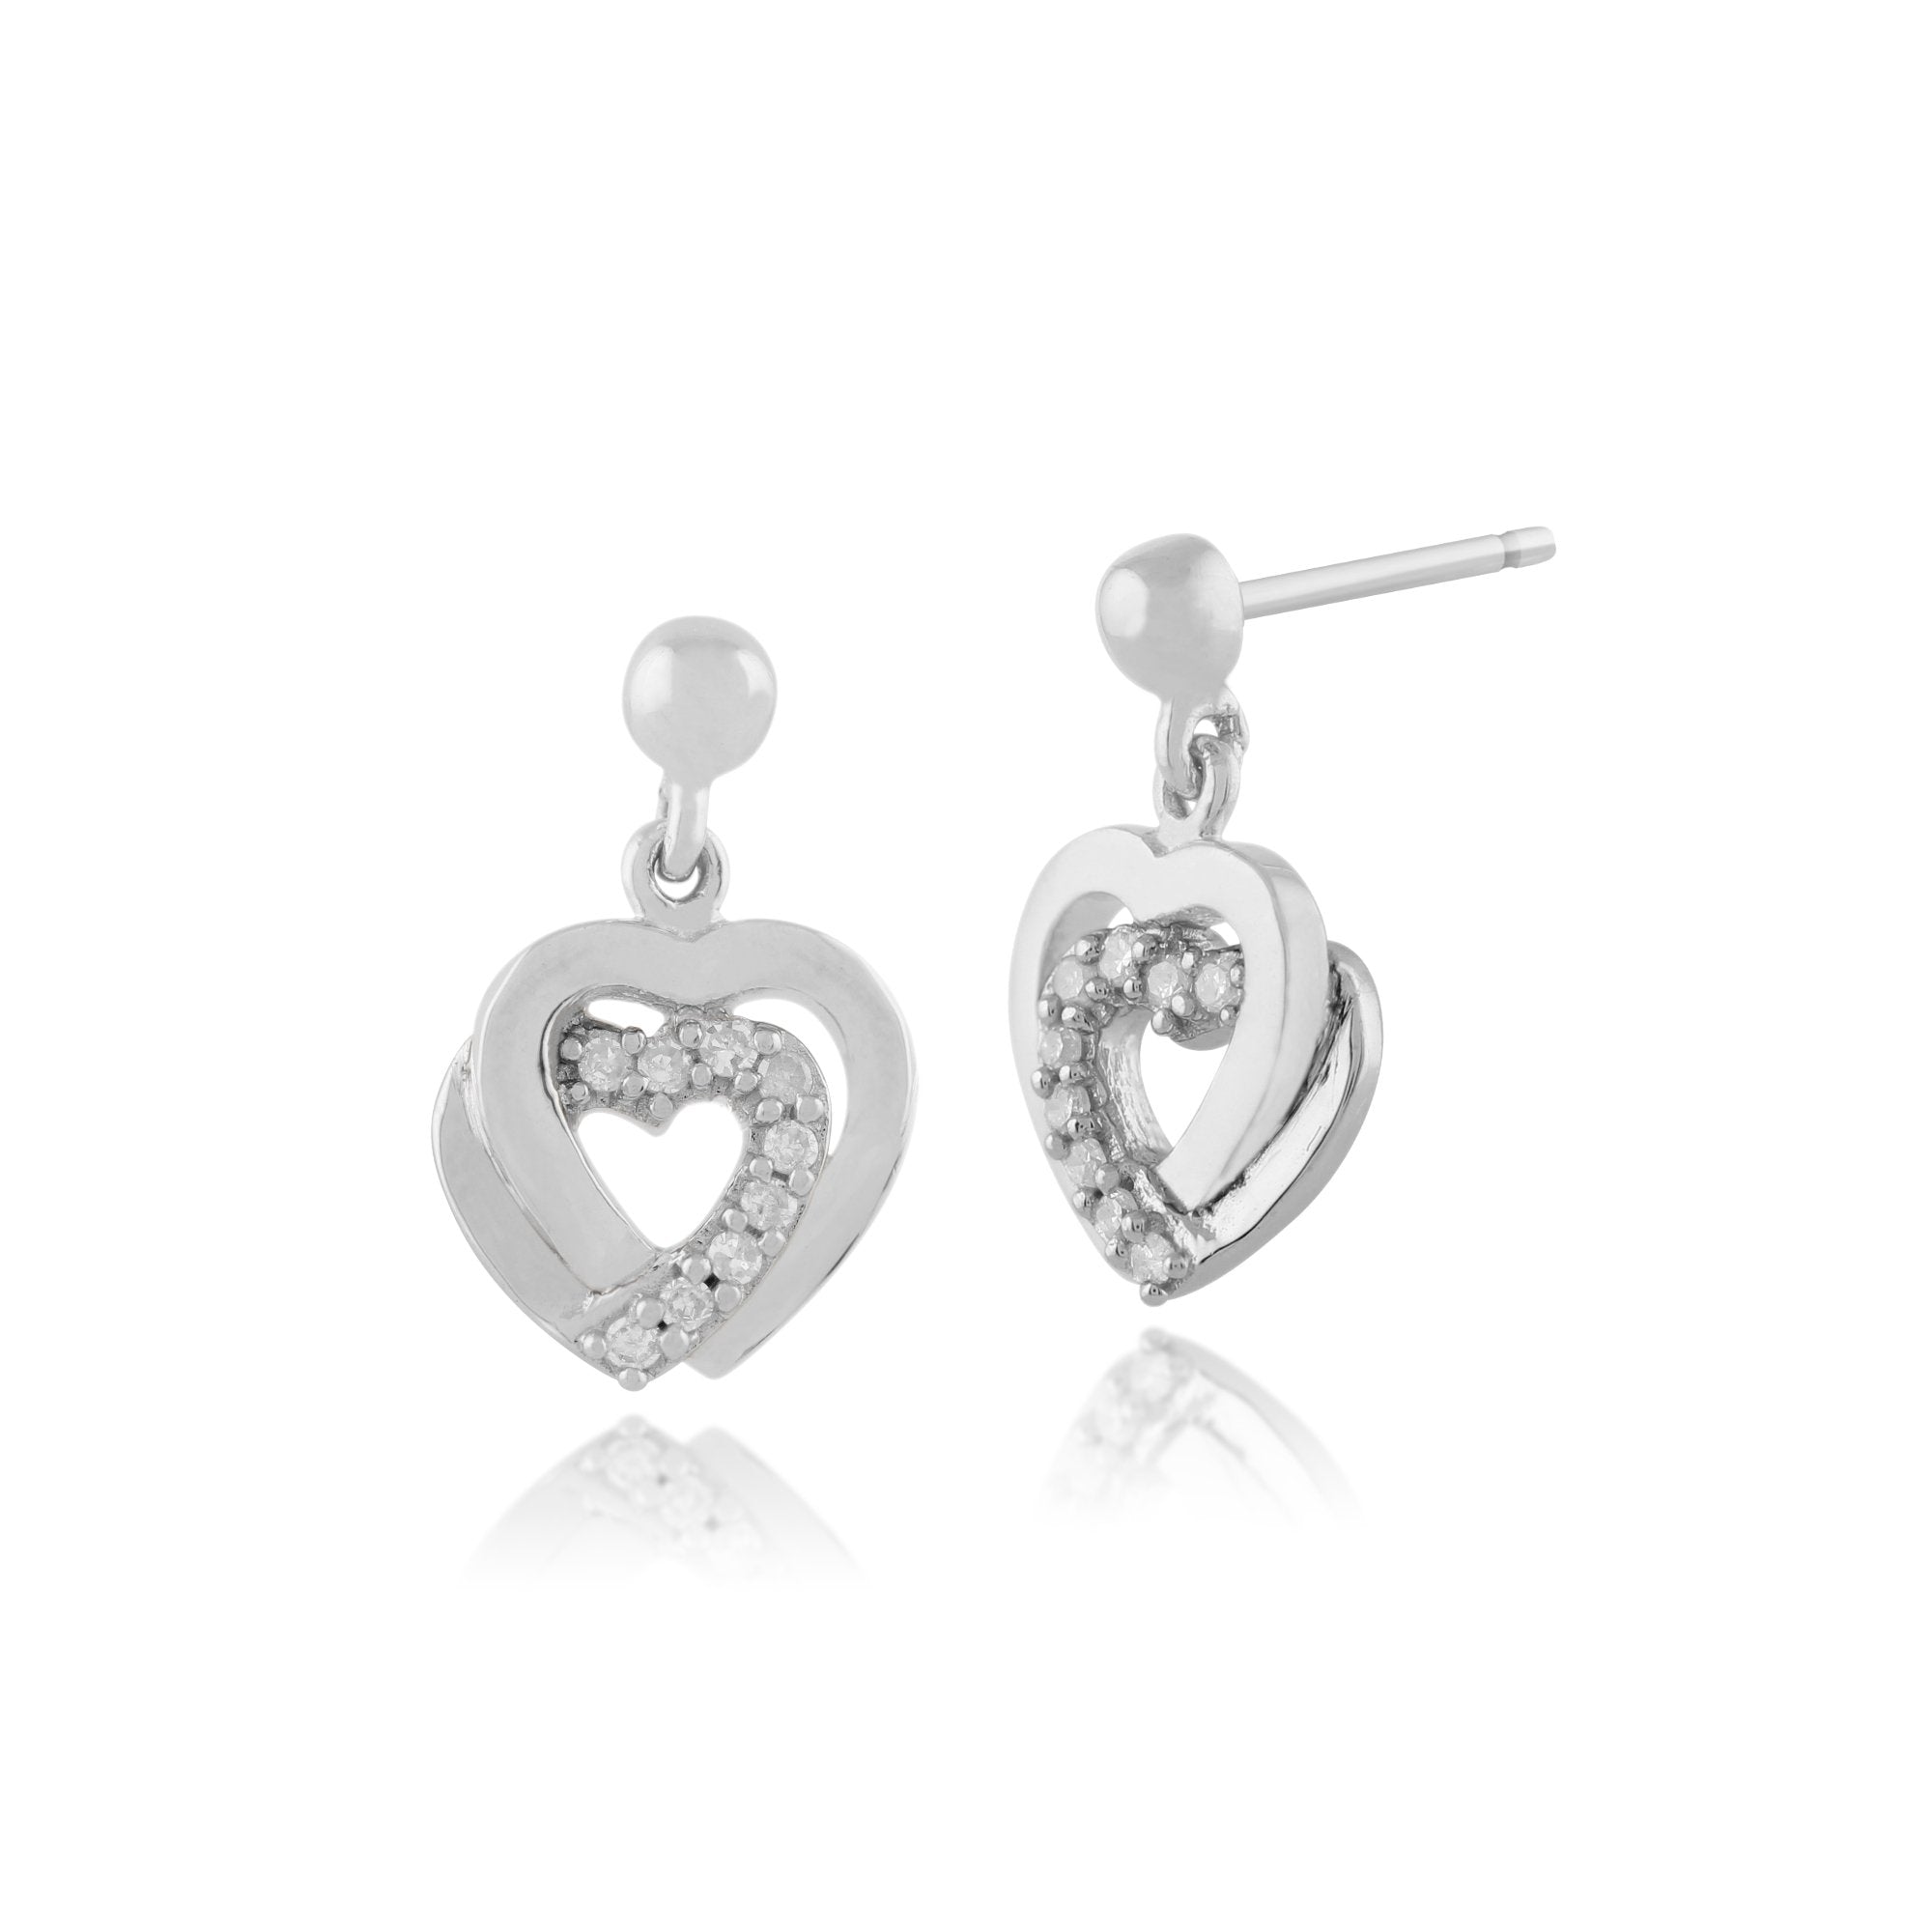 Classic Round Diamond Heart Drop Earrings in 9ct White Gold